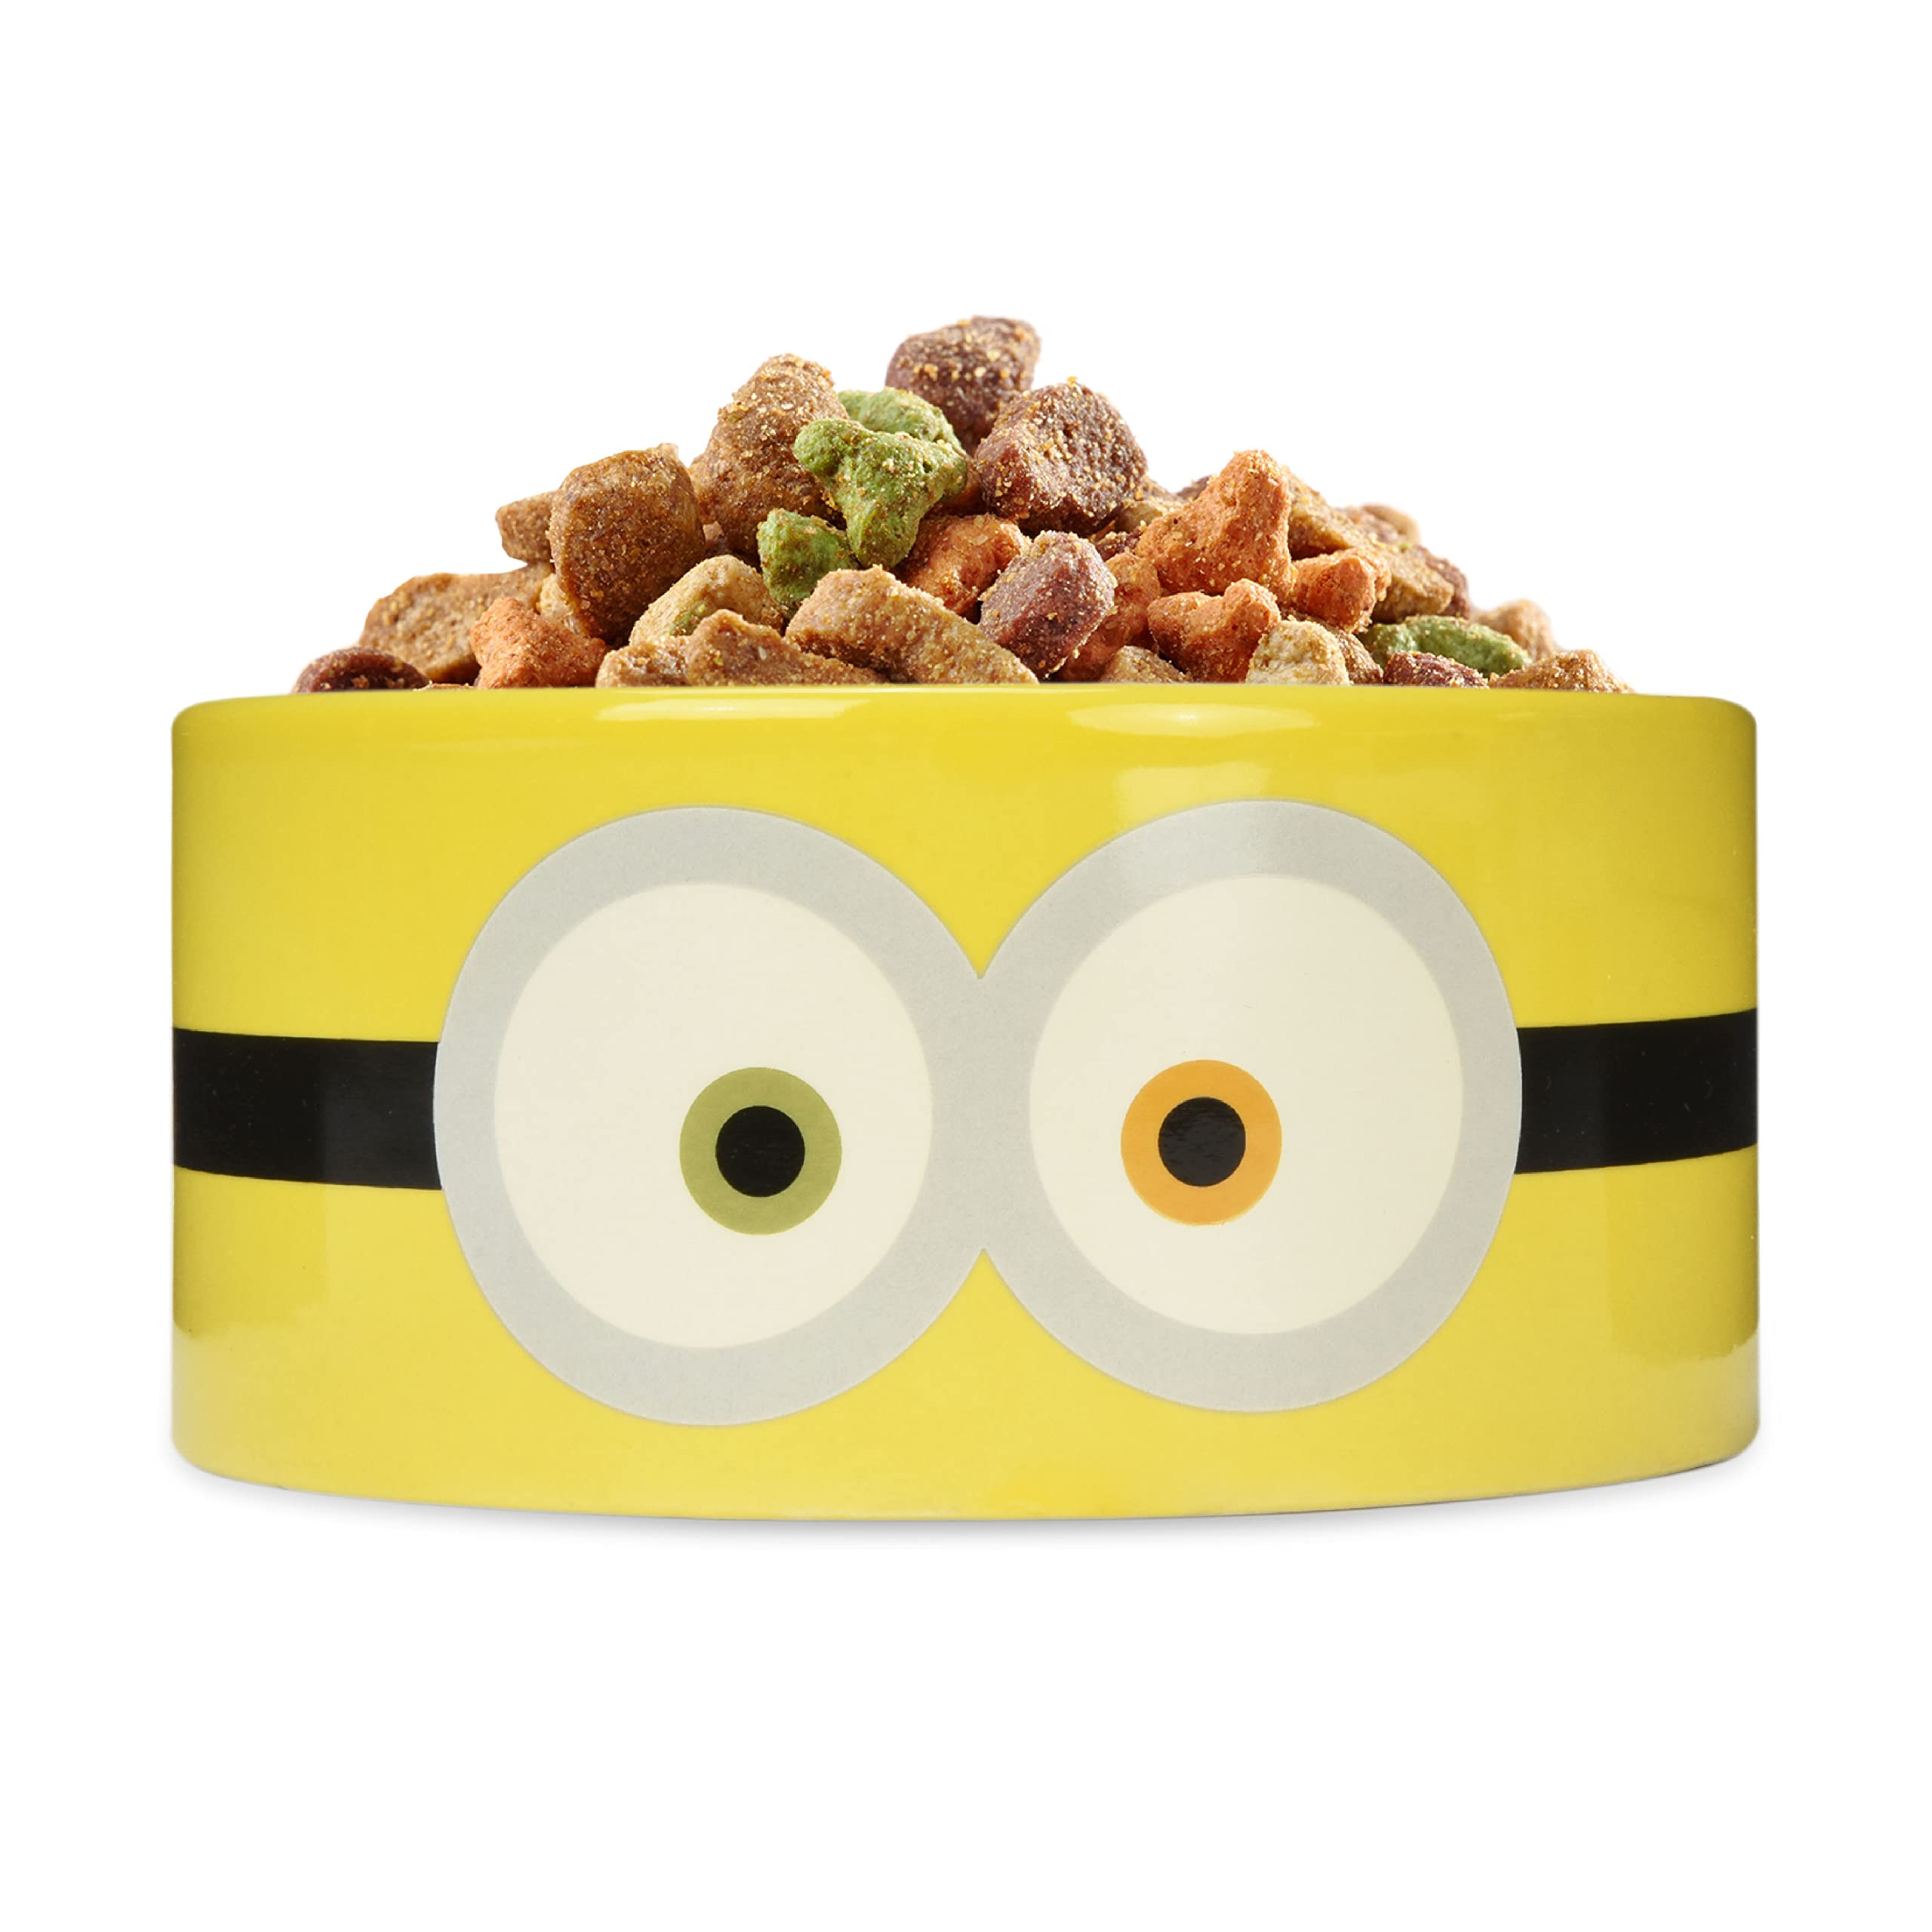 6" Minions Ceramic Pet Food/Water Bowl (Bob or More Than a Minion) $7 + Free Shipping w/ Prime or on $35+